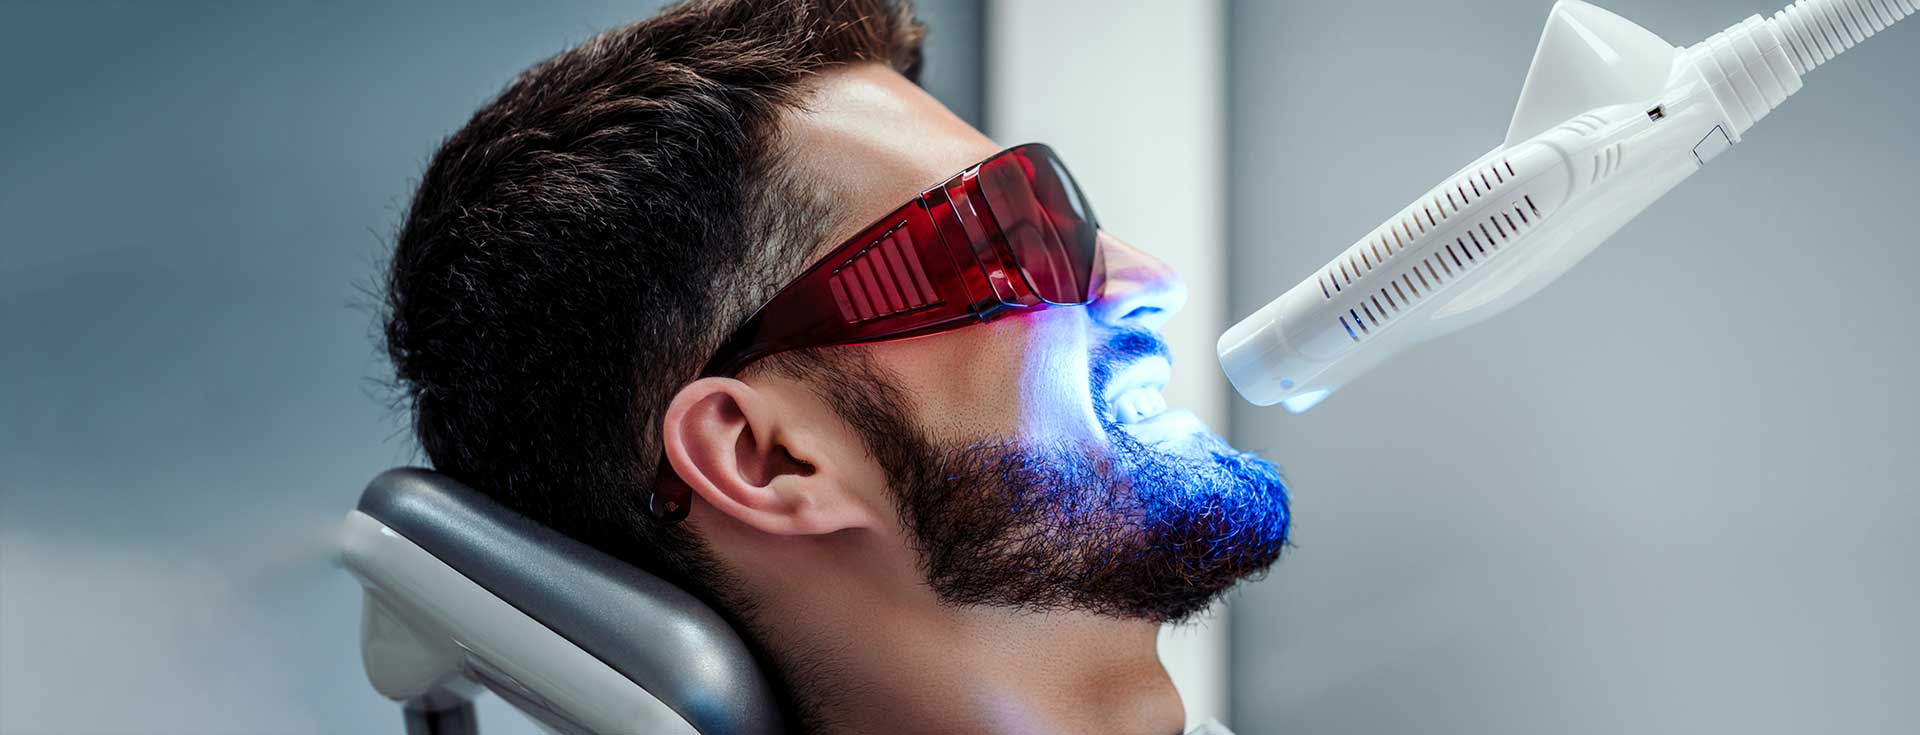 A male patient is getting teeth whitening treatment at the dentist